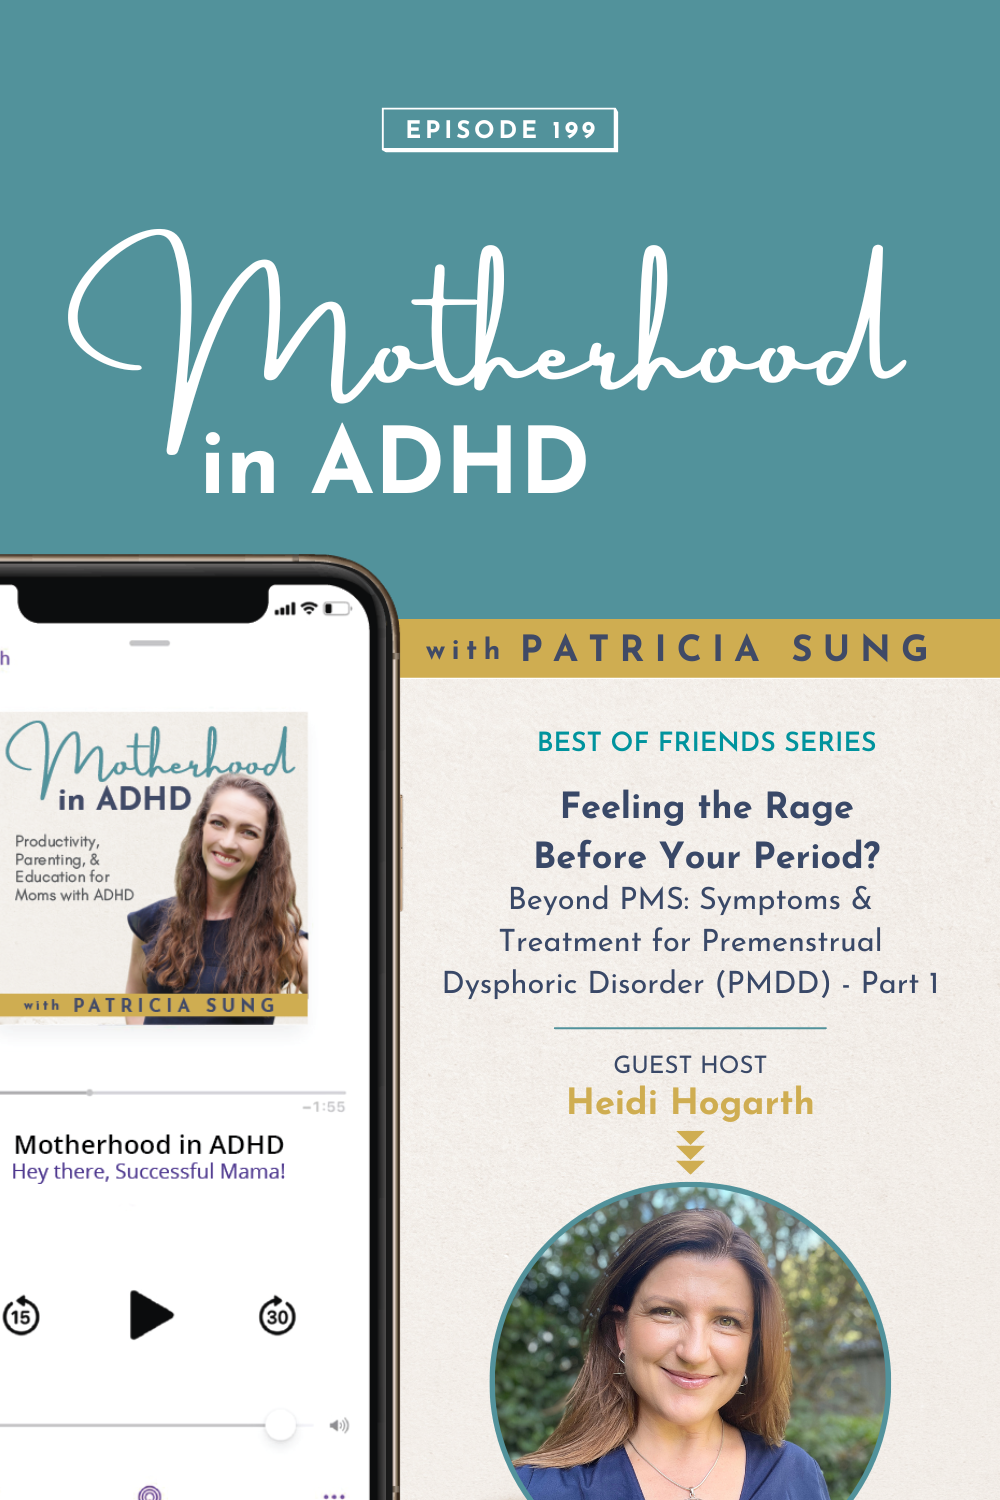 Feeling the Rage before your Period? Beyond PMS: Symptoms & Treatment for  Premenstrual Dysphoric Disorder (PMDD) with Heidi Hogarth (Part 1) - Best  of Friends Series #199 — Patricia Sung ▫ Motherhood in ADHD